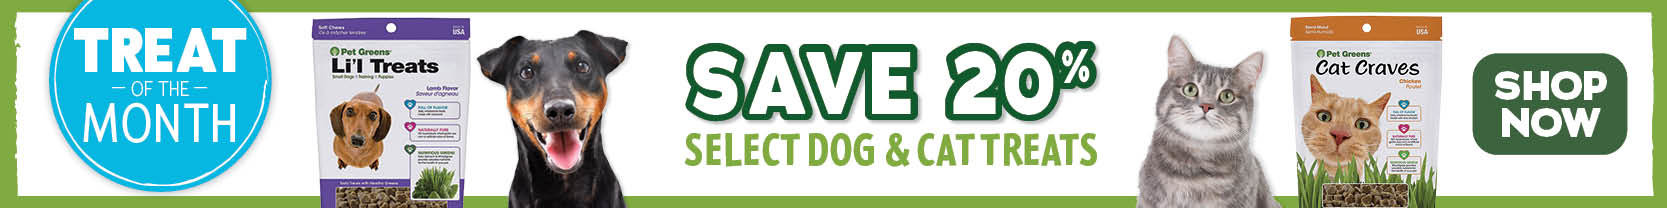 May Treat of the month - Save 20% on select dog and cat treats - shop now